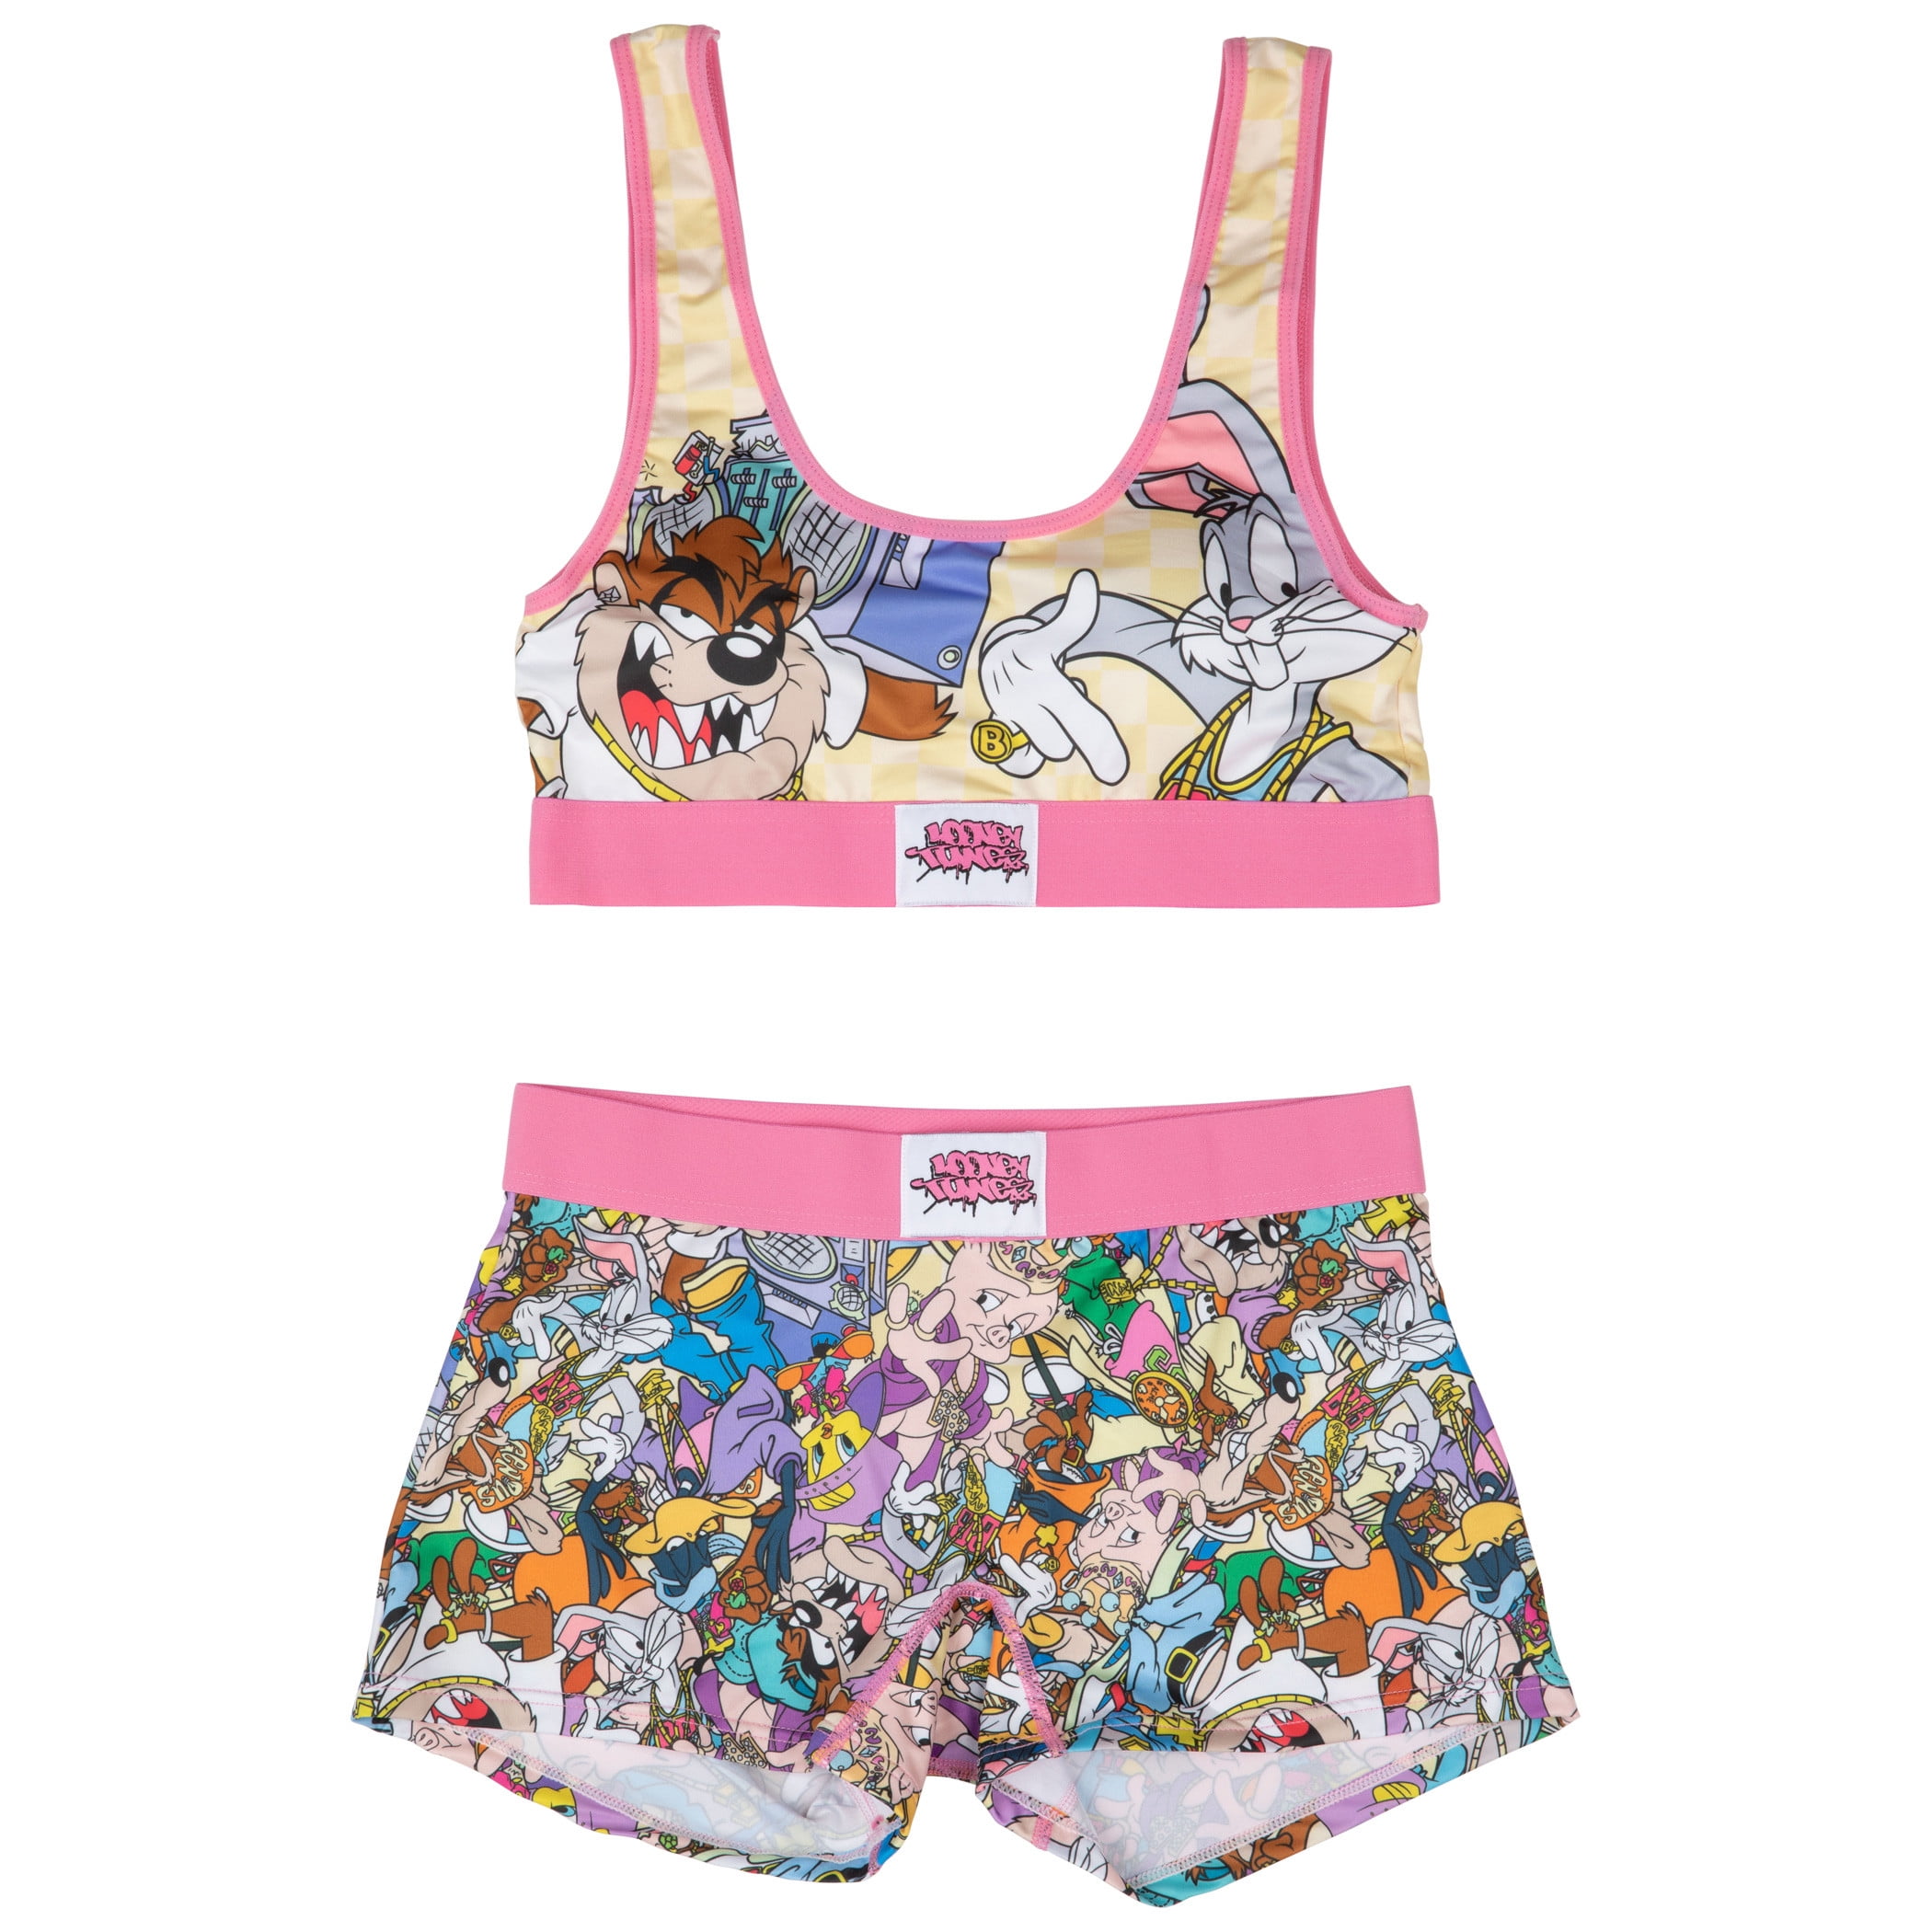 Animal Print Sports Bra and Shorts Set – The Cereal Box Store